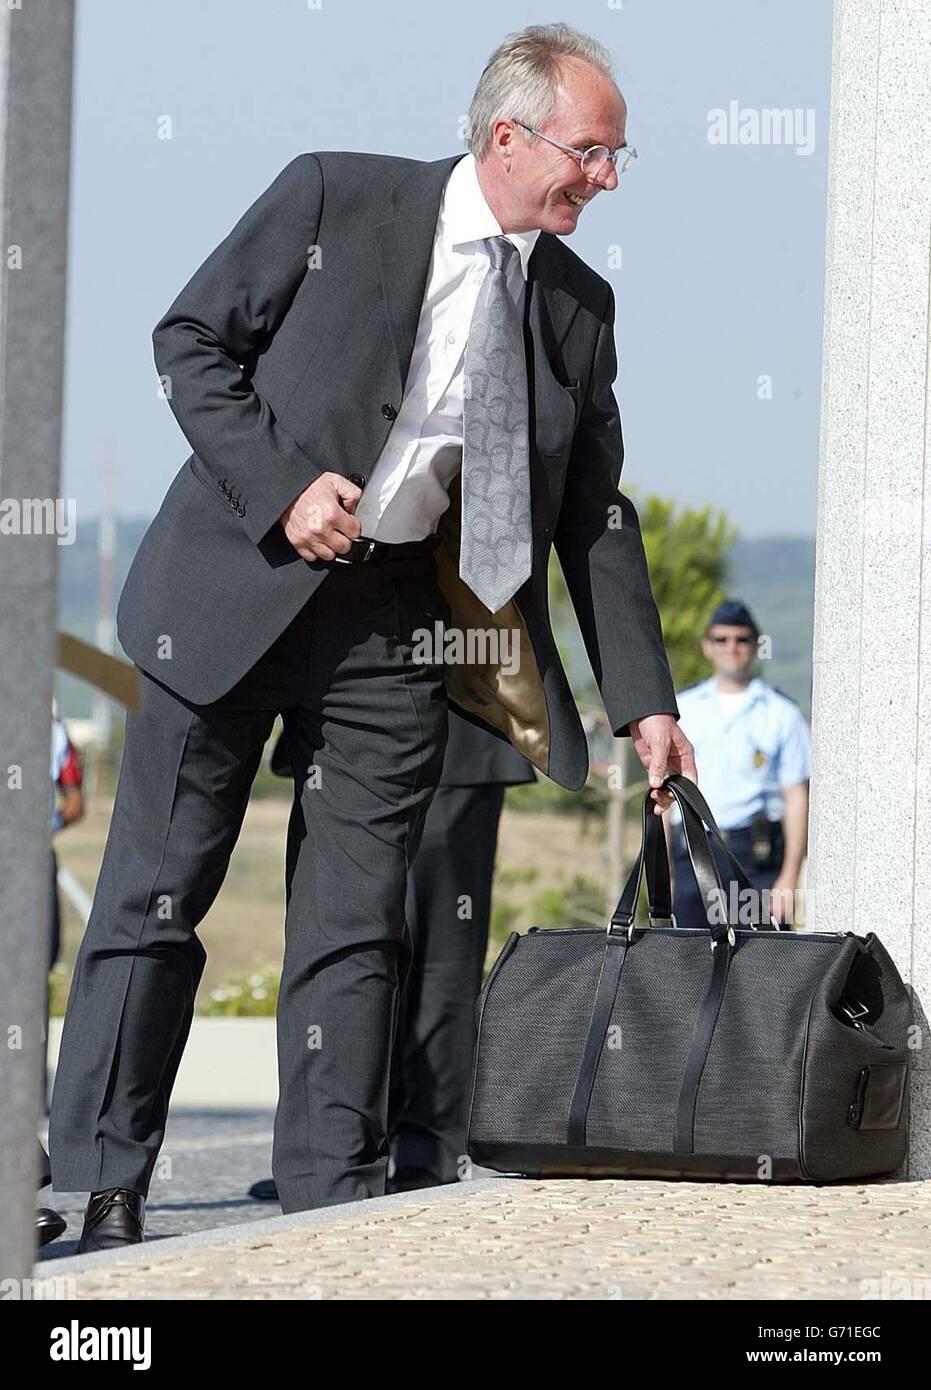 England manager Sven Goran Eriksson arrives with his luggage at the Solplay Hotel in Portugal for the Euro 2004 tournament. England will play their opening first round match against France on Sunday. Stock Photo